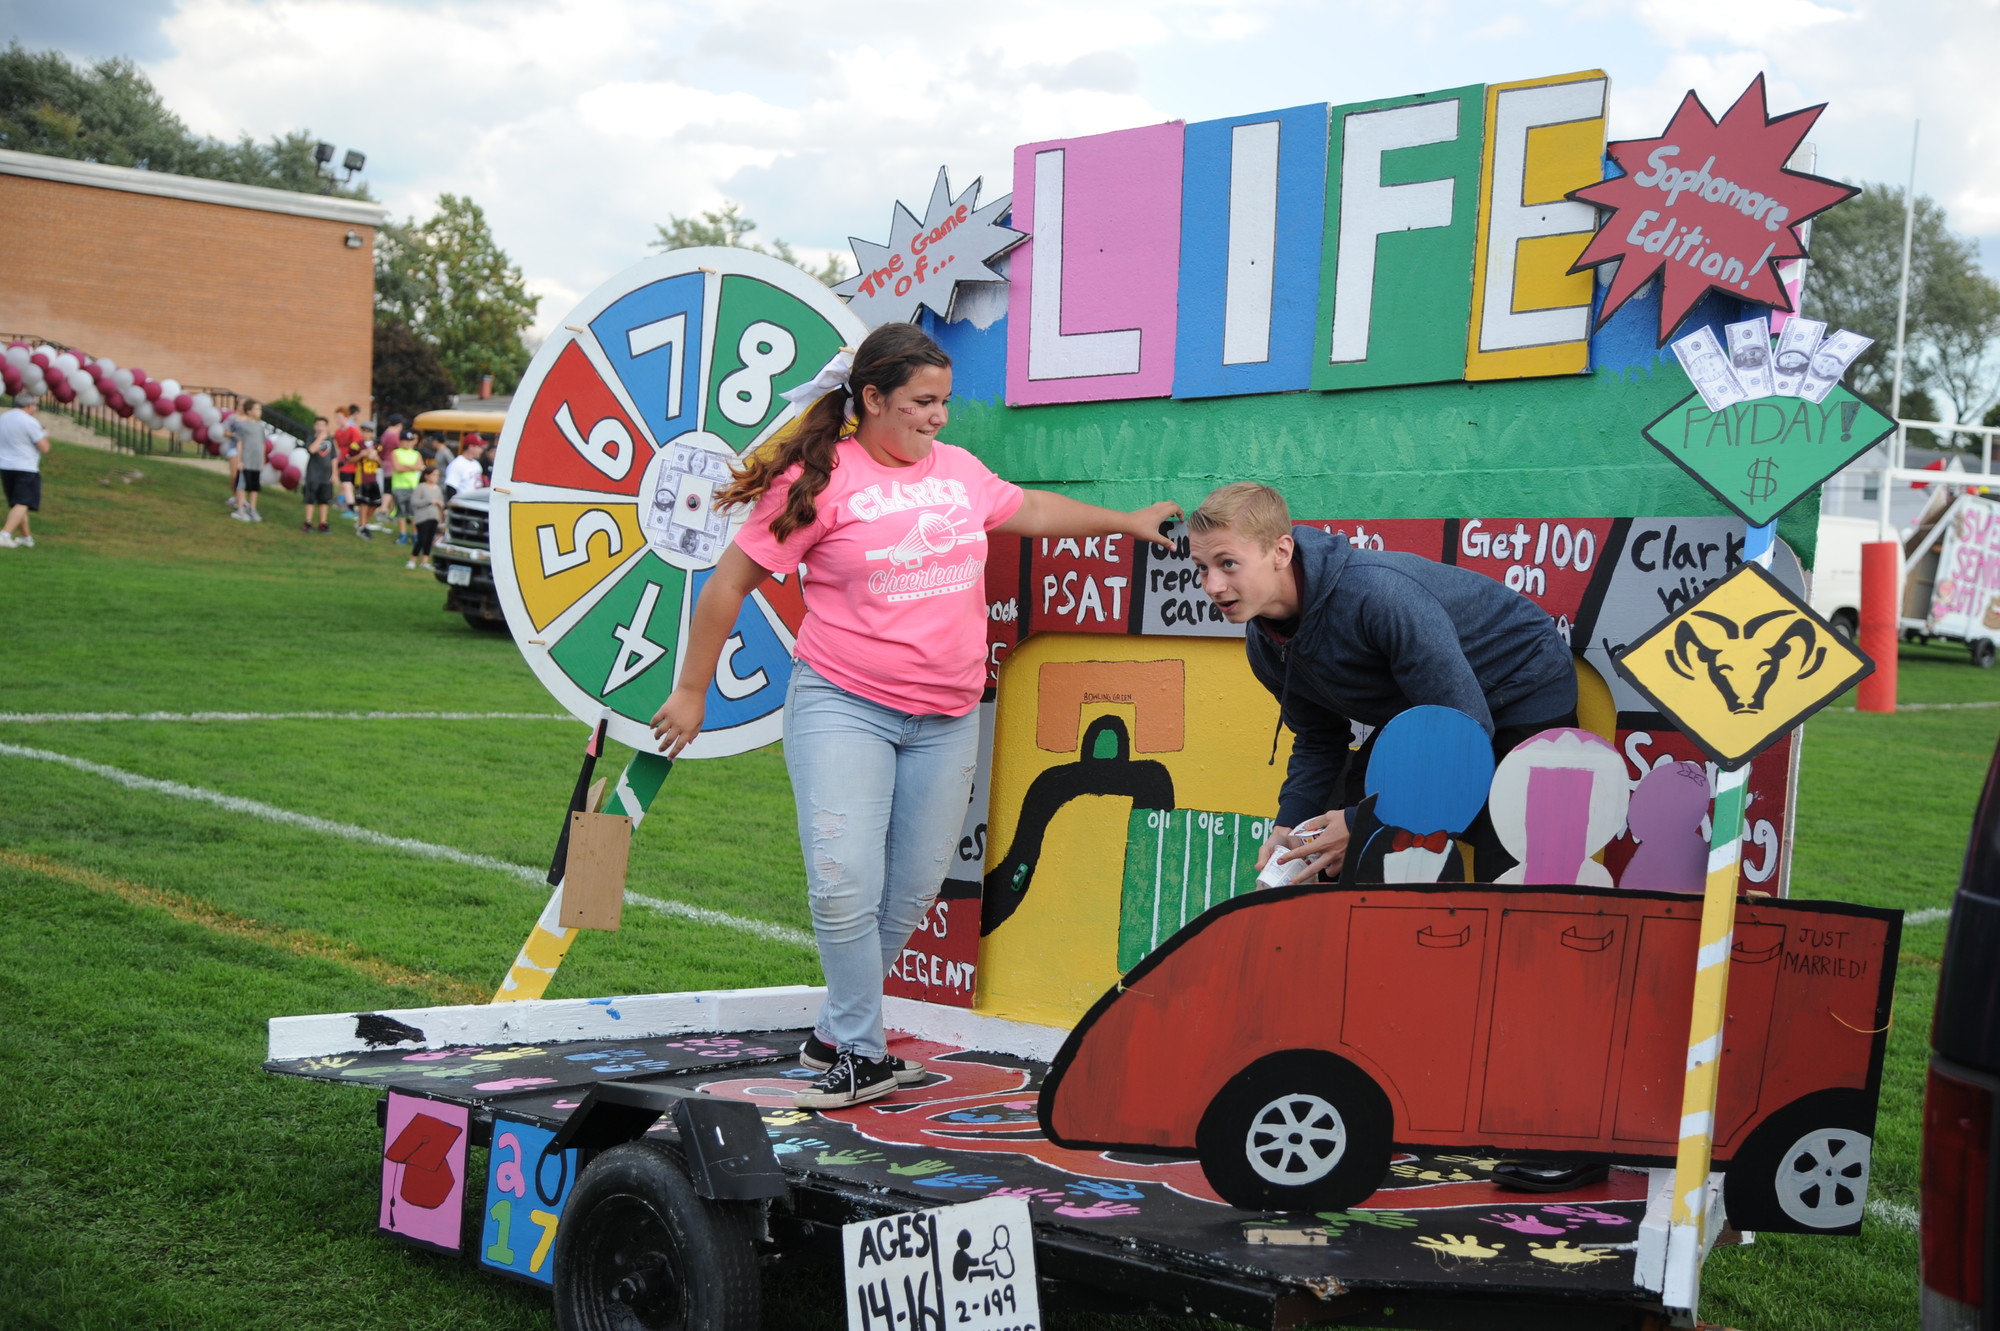 It was a board game theme for Clarke’s student floats at Saturday's Homecoming parade. Above, the sophomore class designed a mobile Game of Life.